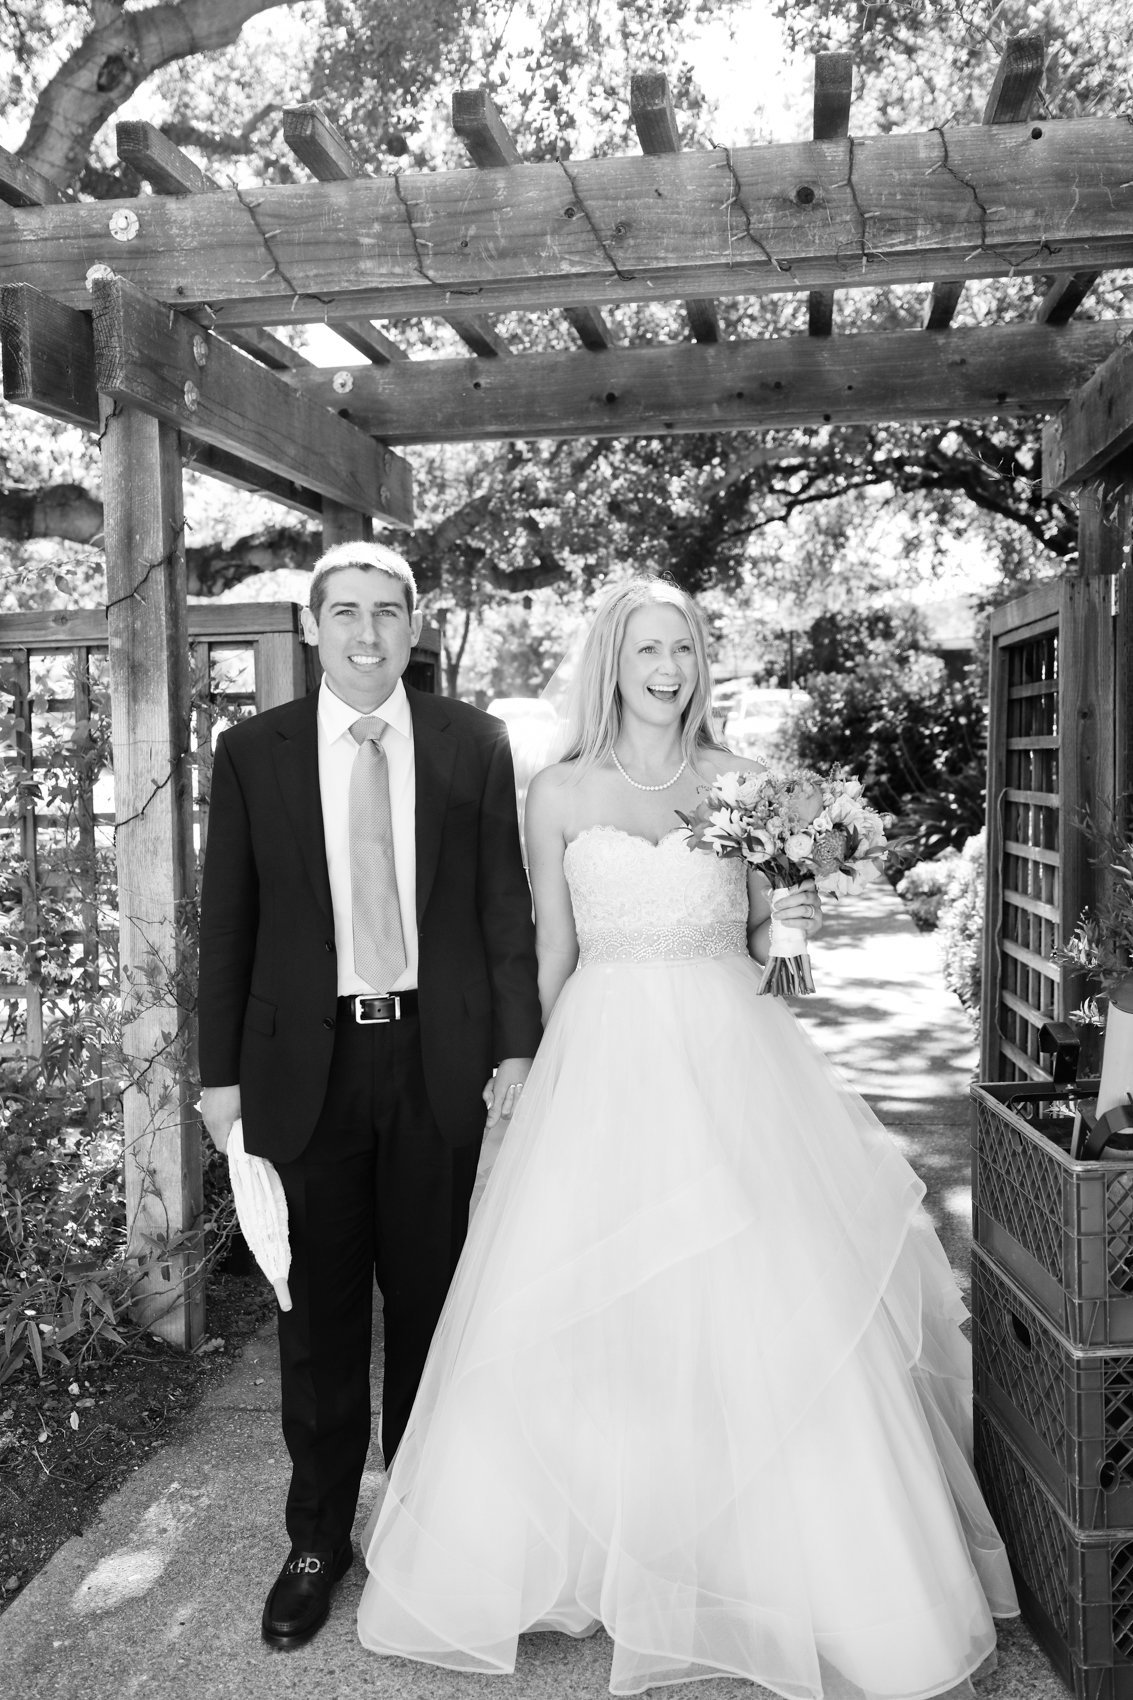 Bride and groom portrait california wedding black and white photography couple love